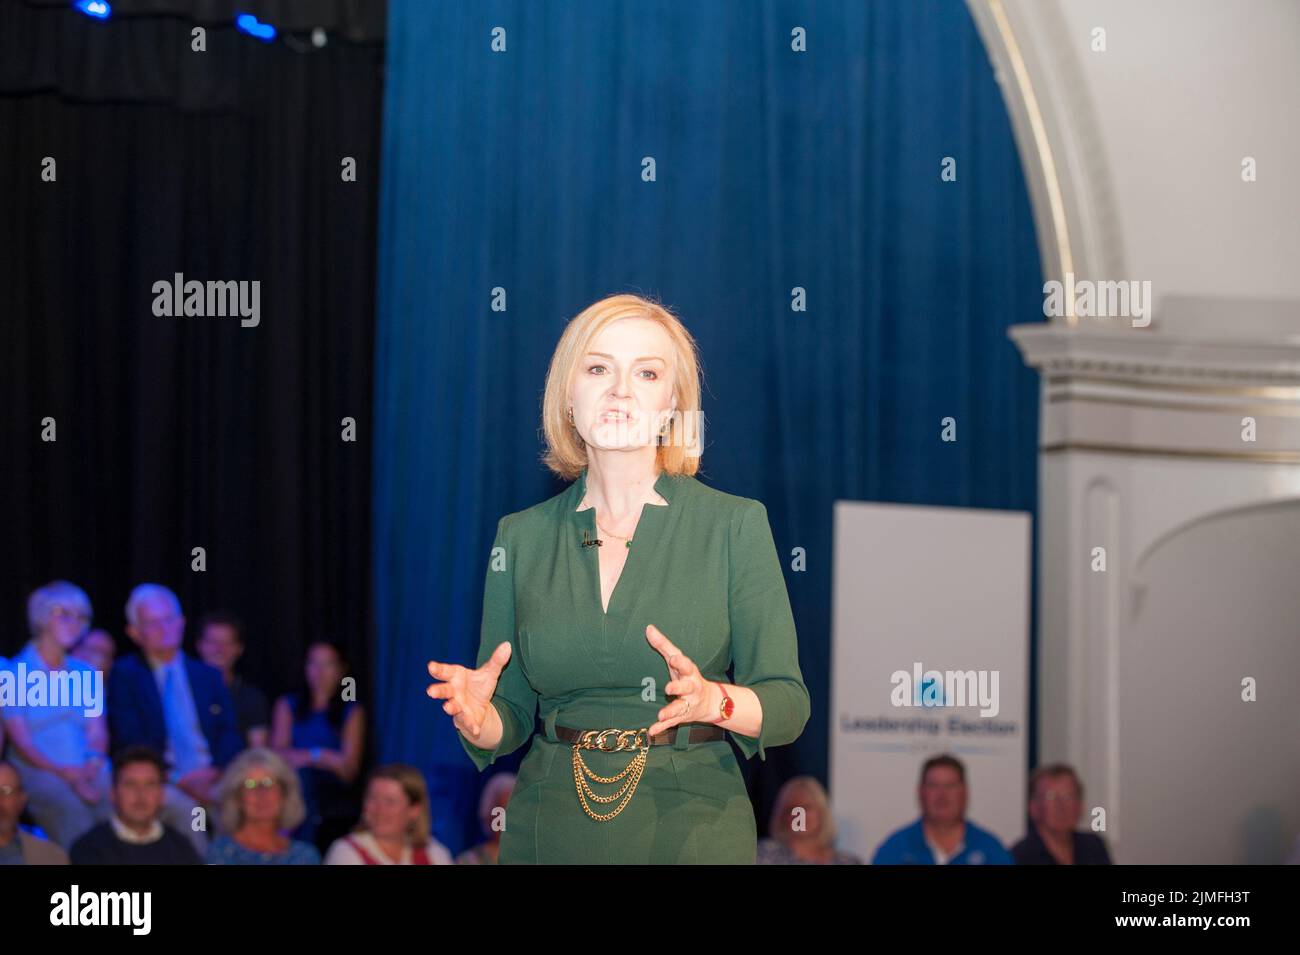 Liz Truss, Foreign Secretary and MP for South West Norfolk, in Eastbourne to face questions from Conservative party members. Part of cross country hustings campaigning to replace Boris Johnson as Party Leader and Prime Minister. Stock Photo